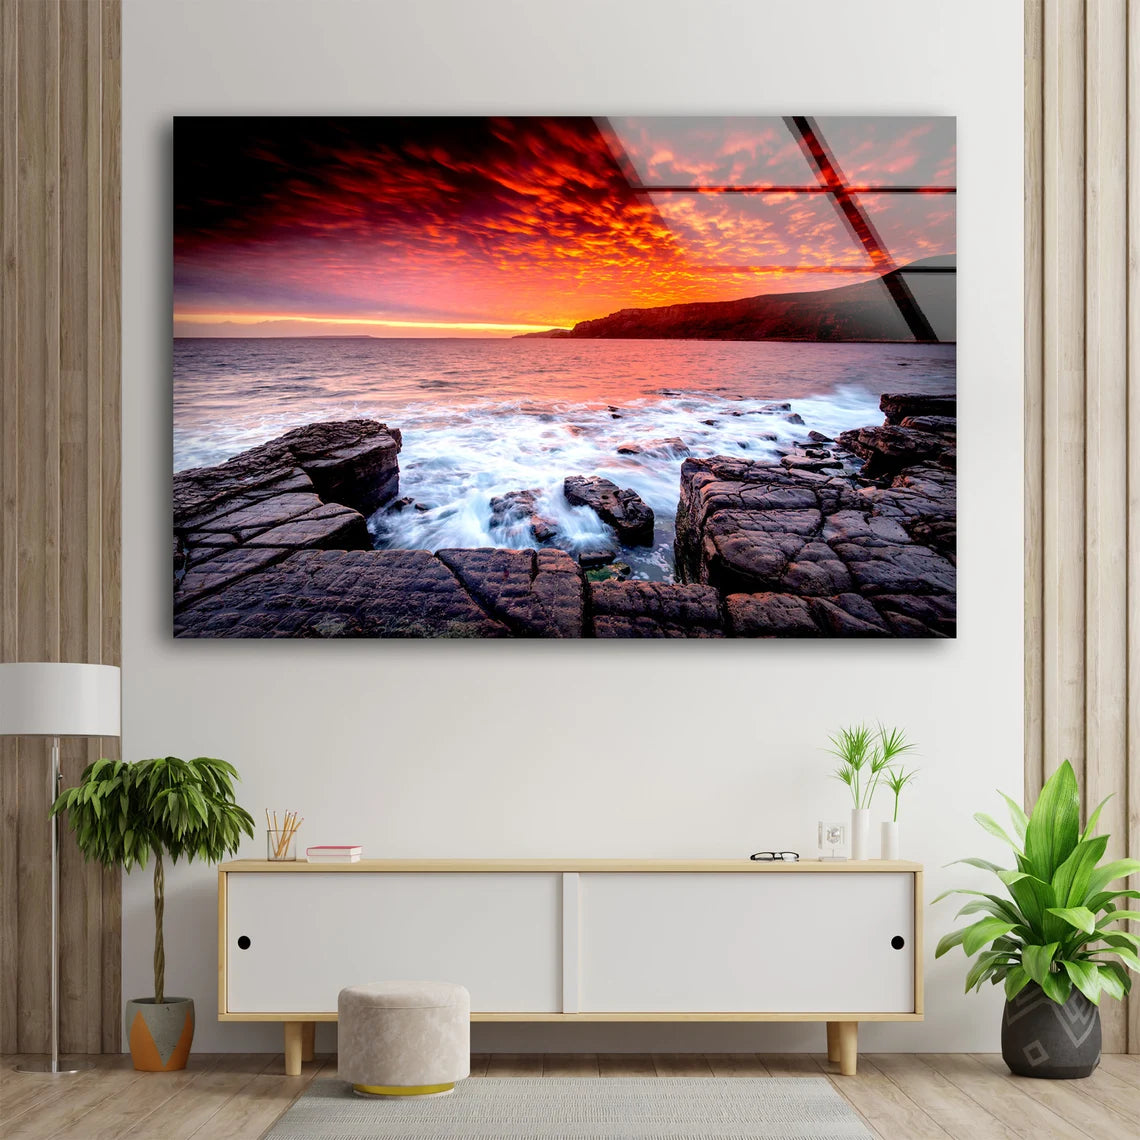 Sea with Rocks Sunset Scenery Photograph Acrylic Glass Print Tempered Glass Wall Art 100% Made in Australia Ready to Hang